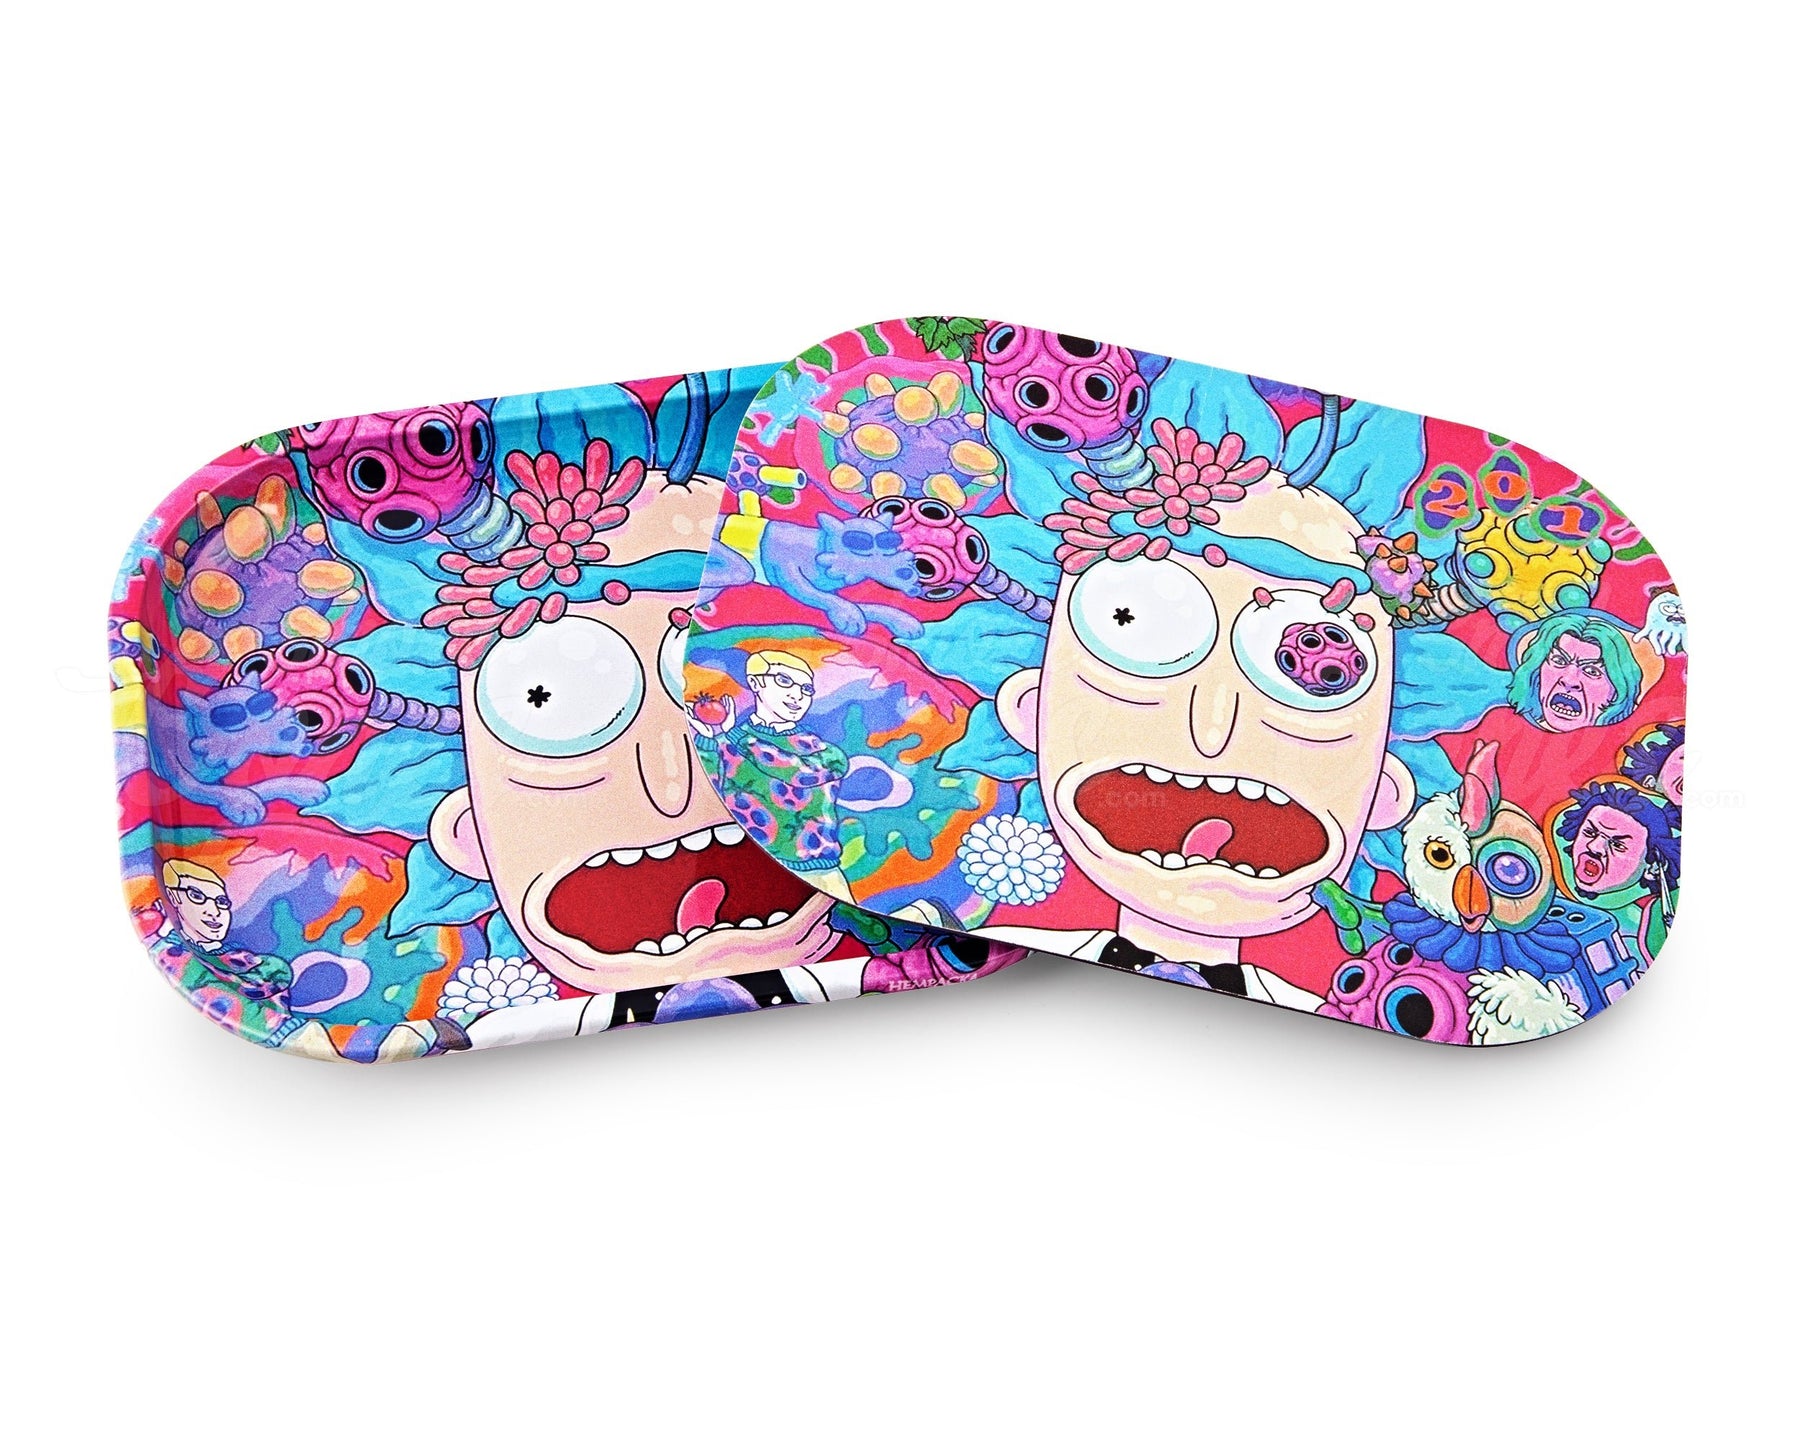 R&M Trippy Mini Rolling Tray w/ Magnetic Cover - 5